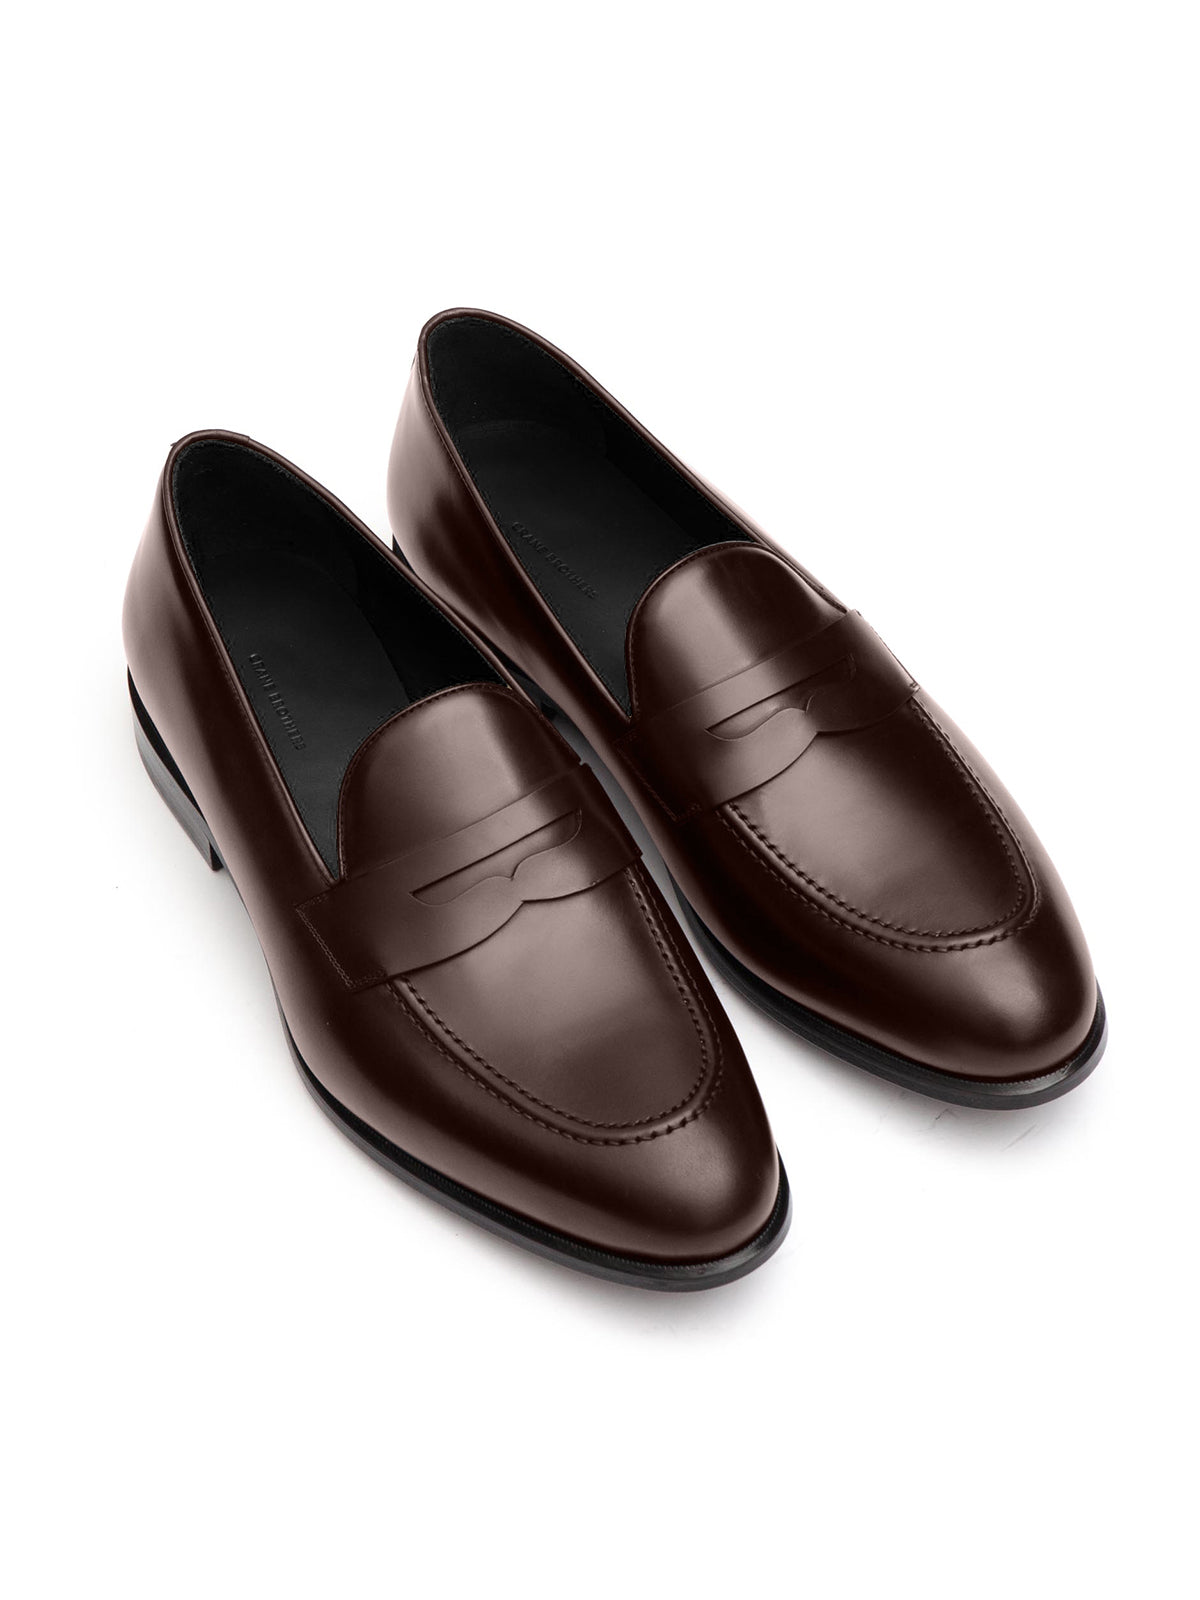 Polished Dark Brown Calf Leather Penny Loafer